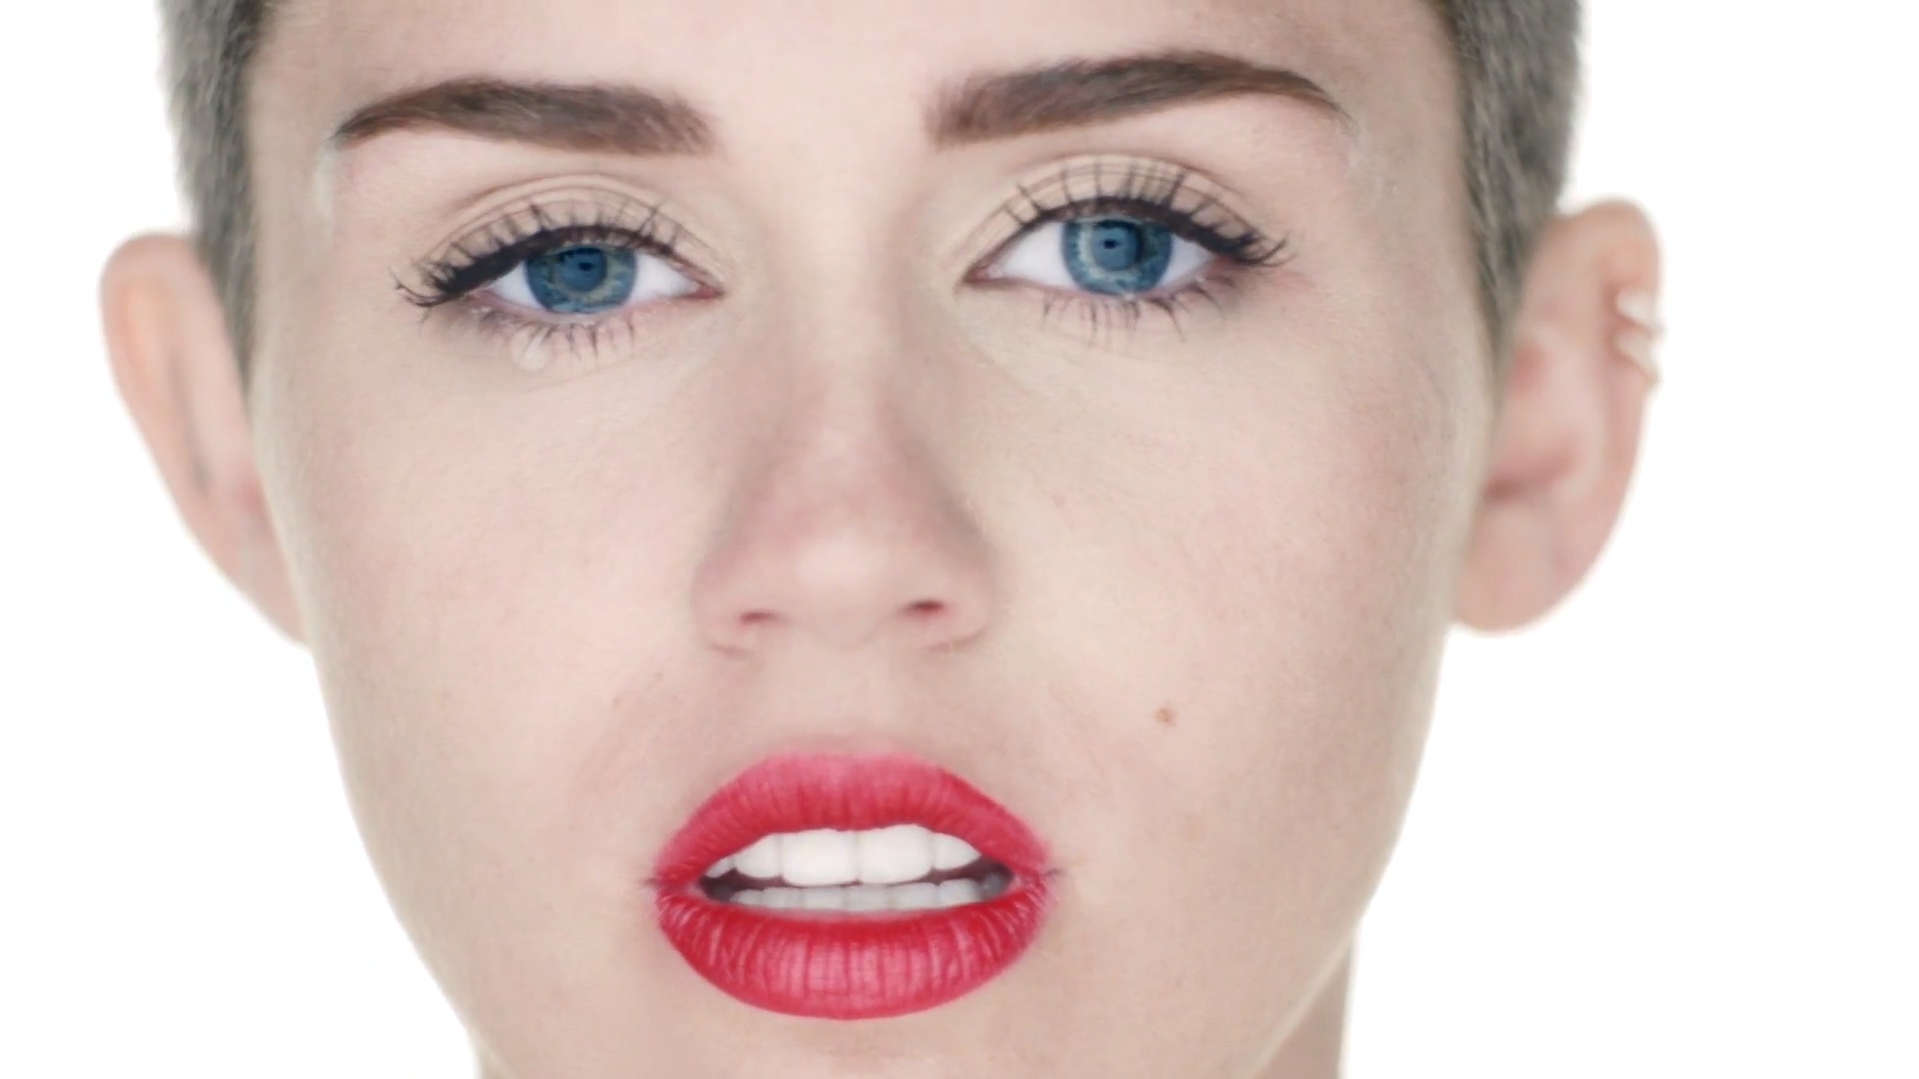 Miley Cyrus in Music Video: Wrecking Ball